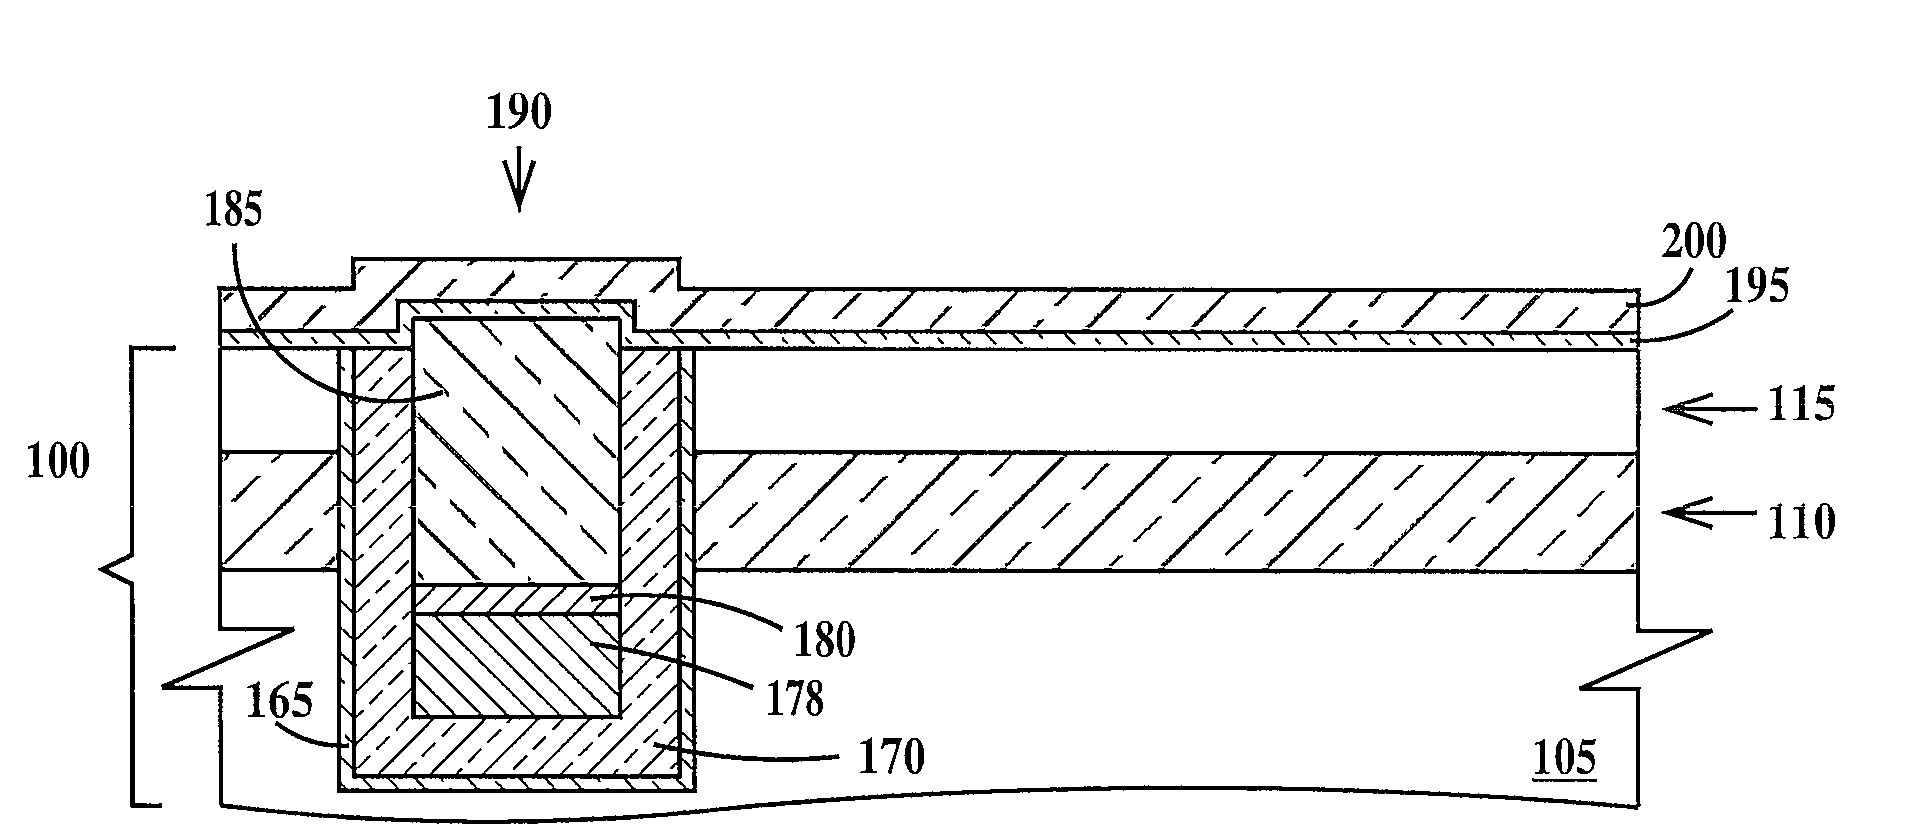 High-z structure and method for co-alignment of mixed optical and electron beam lithographic fabrication levels